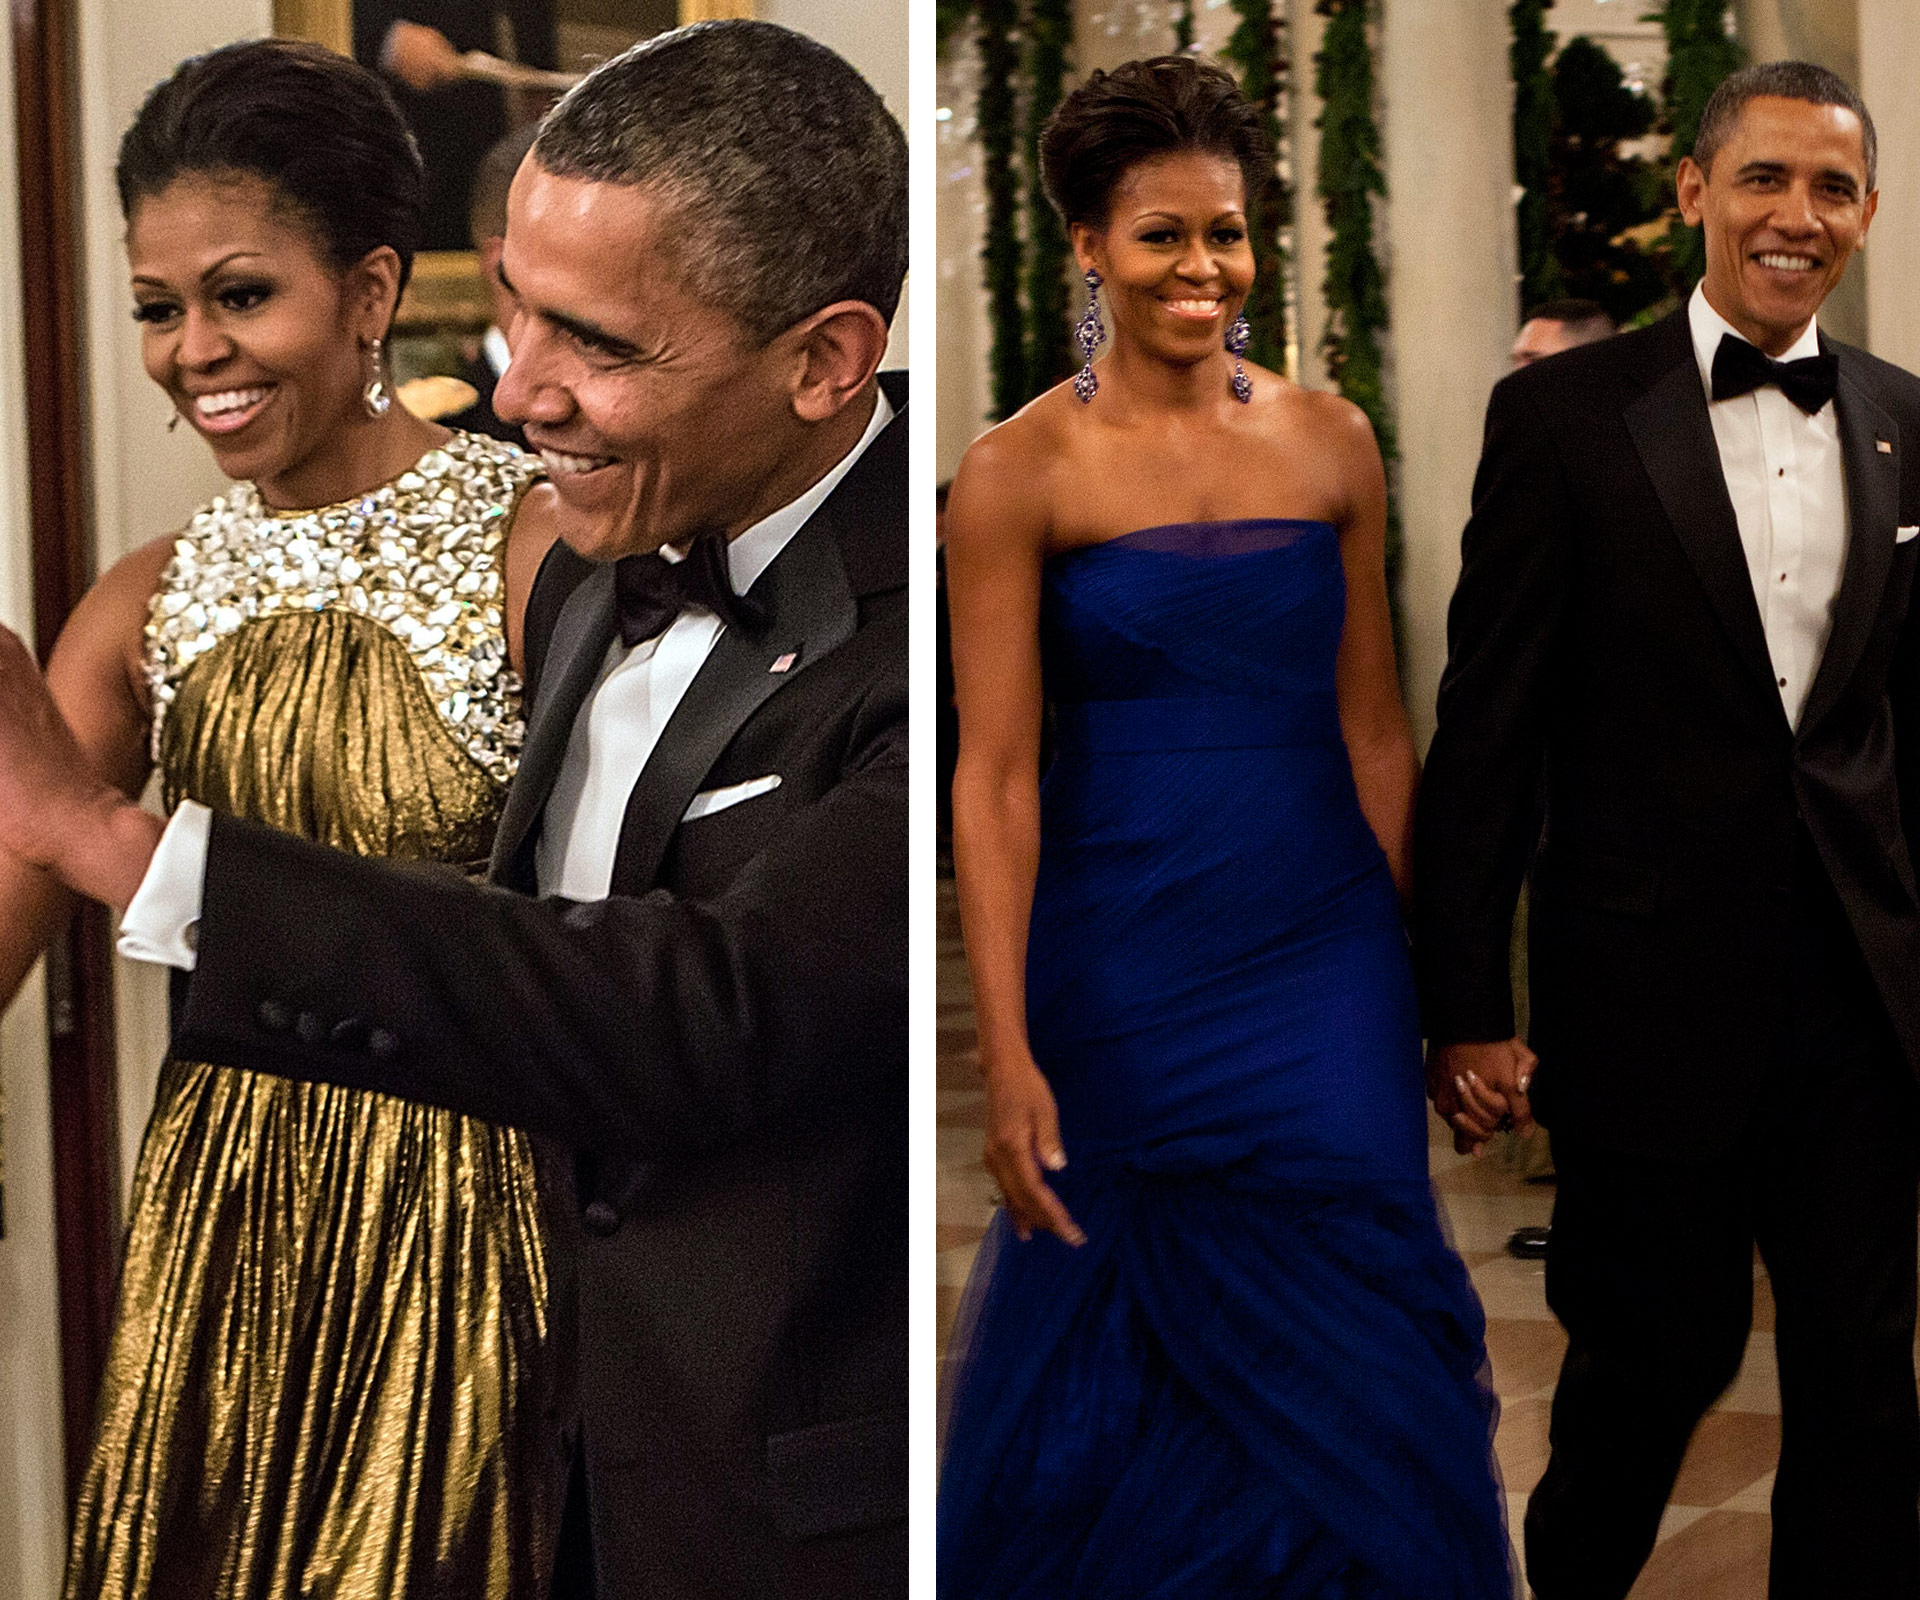 Michelle Obama wows at final Kennedy Center Honors gala